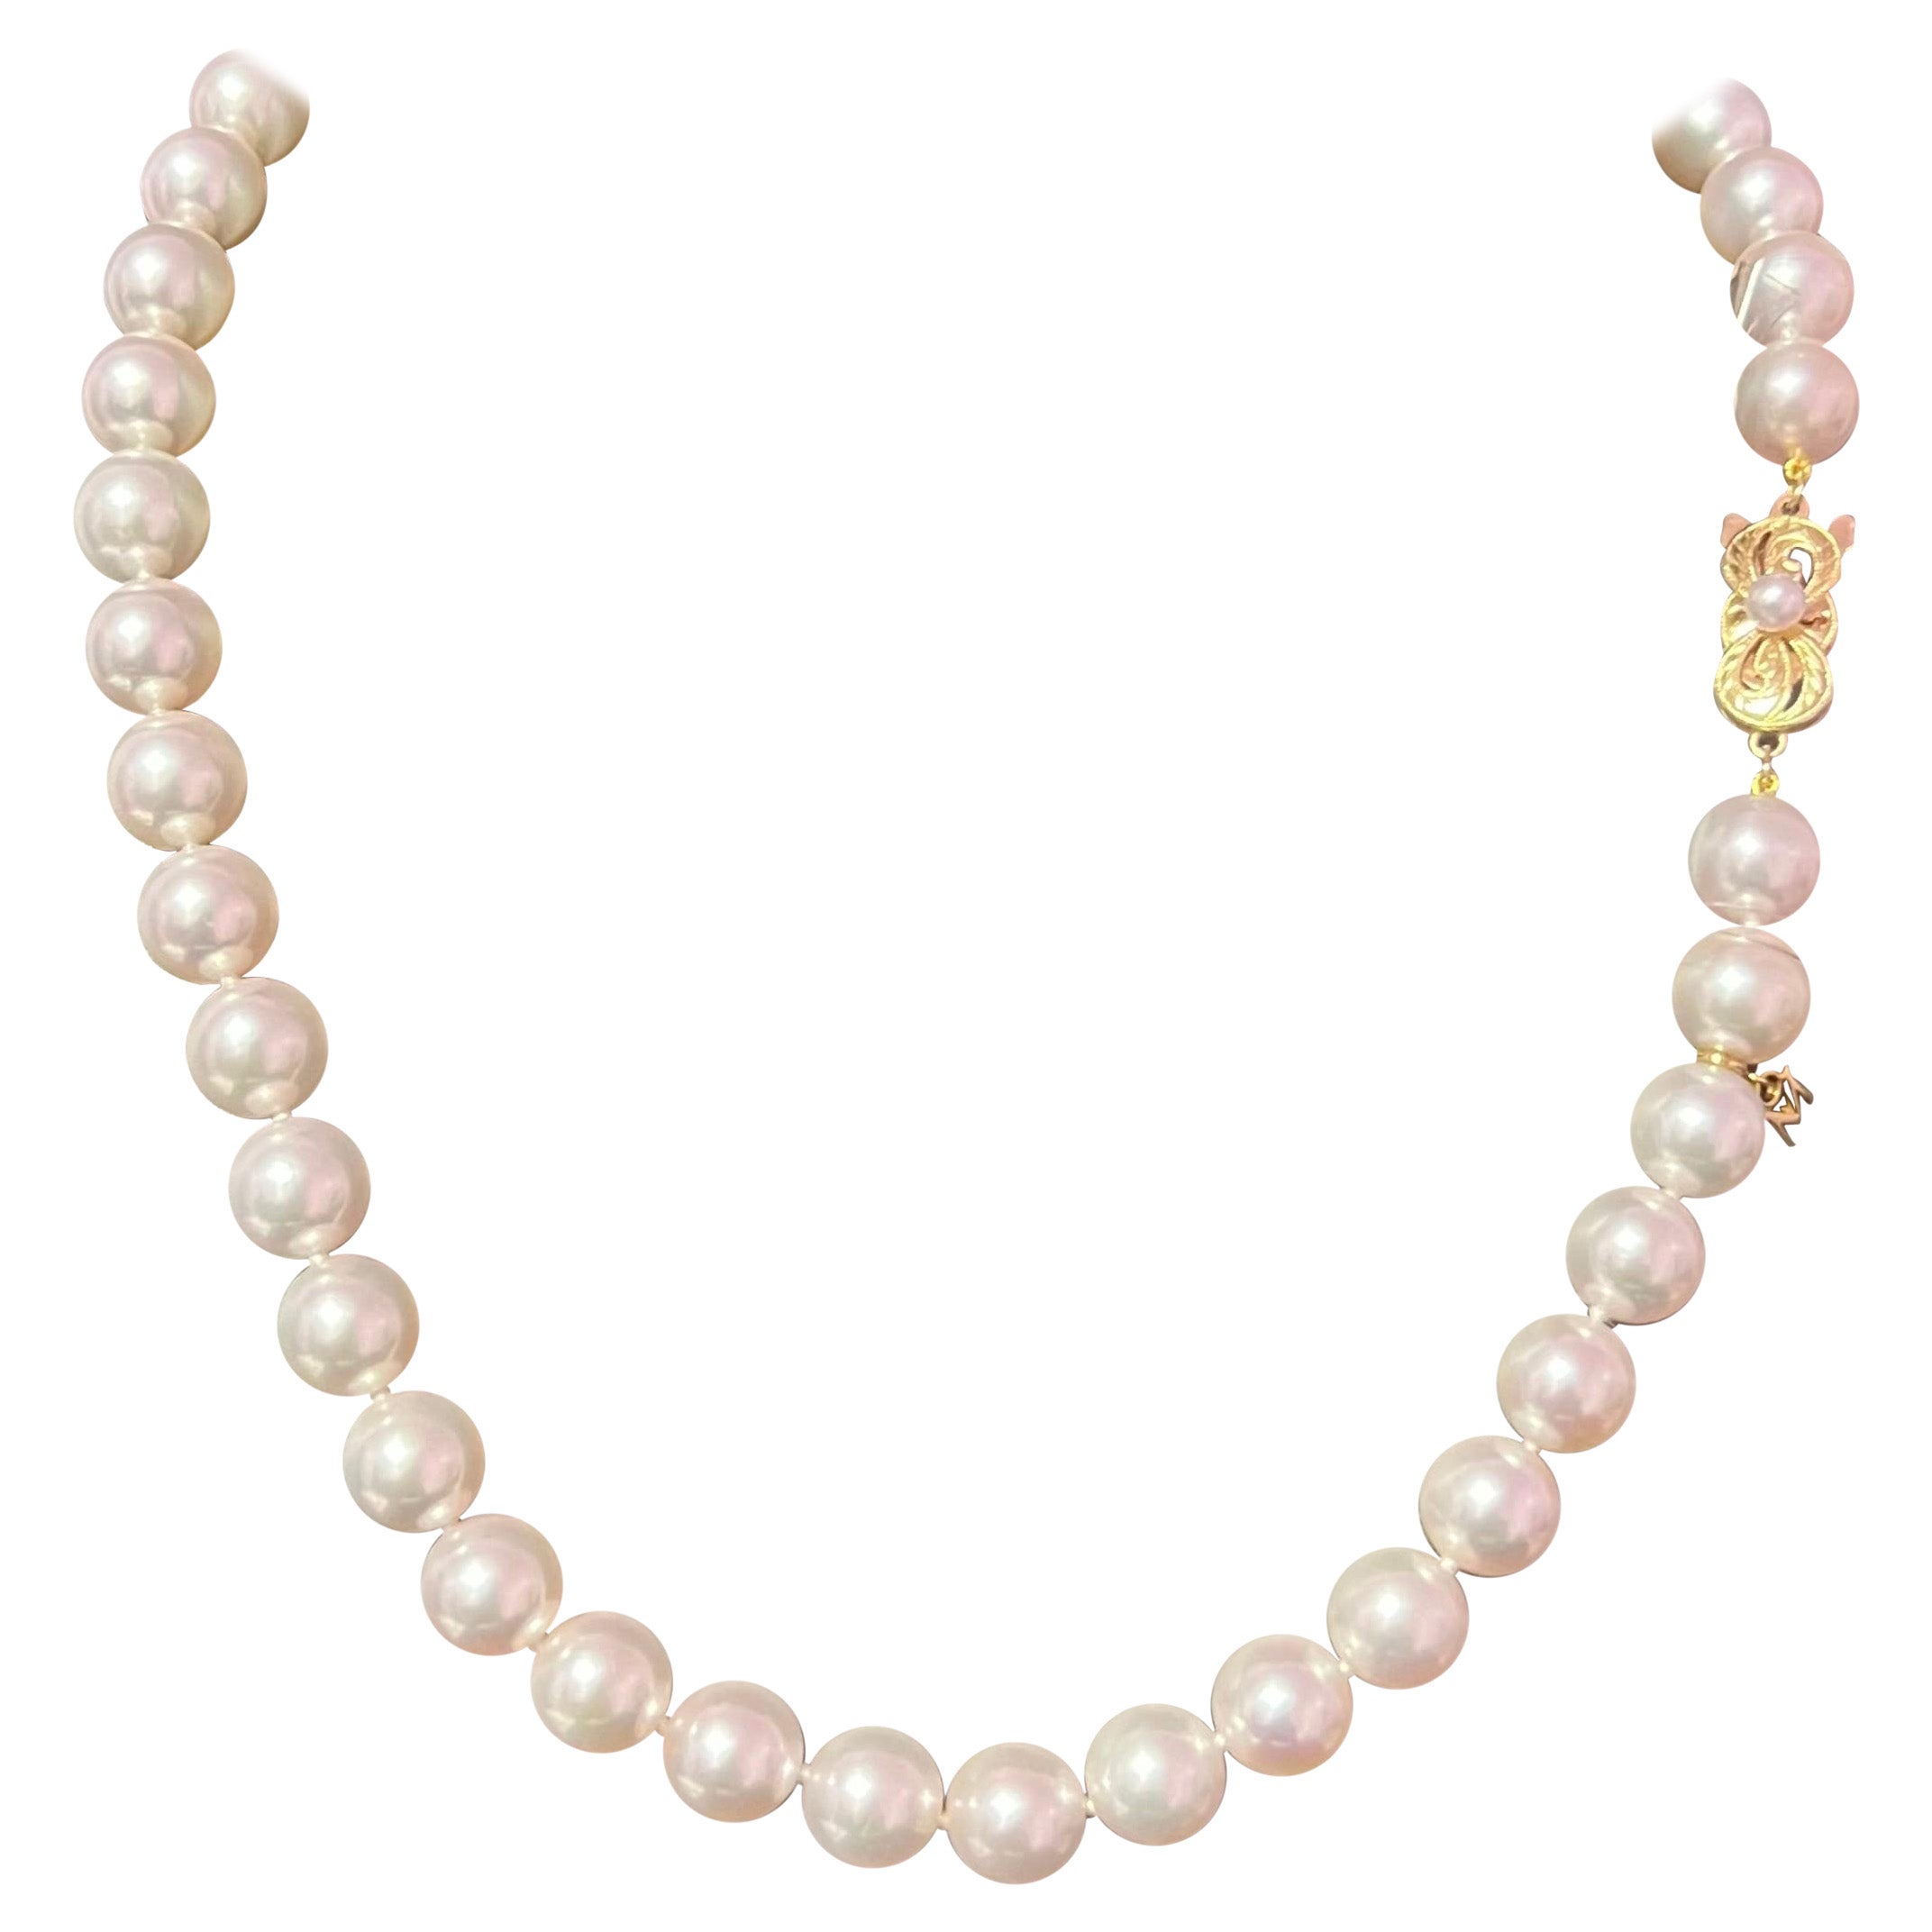 Mikimoto Estate Akoya Pearl Necklace 18k Gold 9.5 mm Certified M35435 For Sale